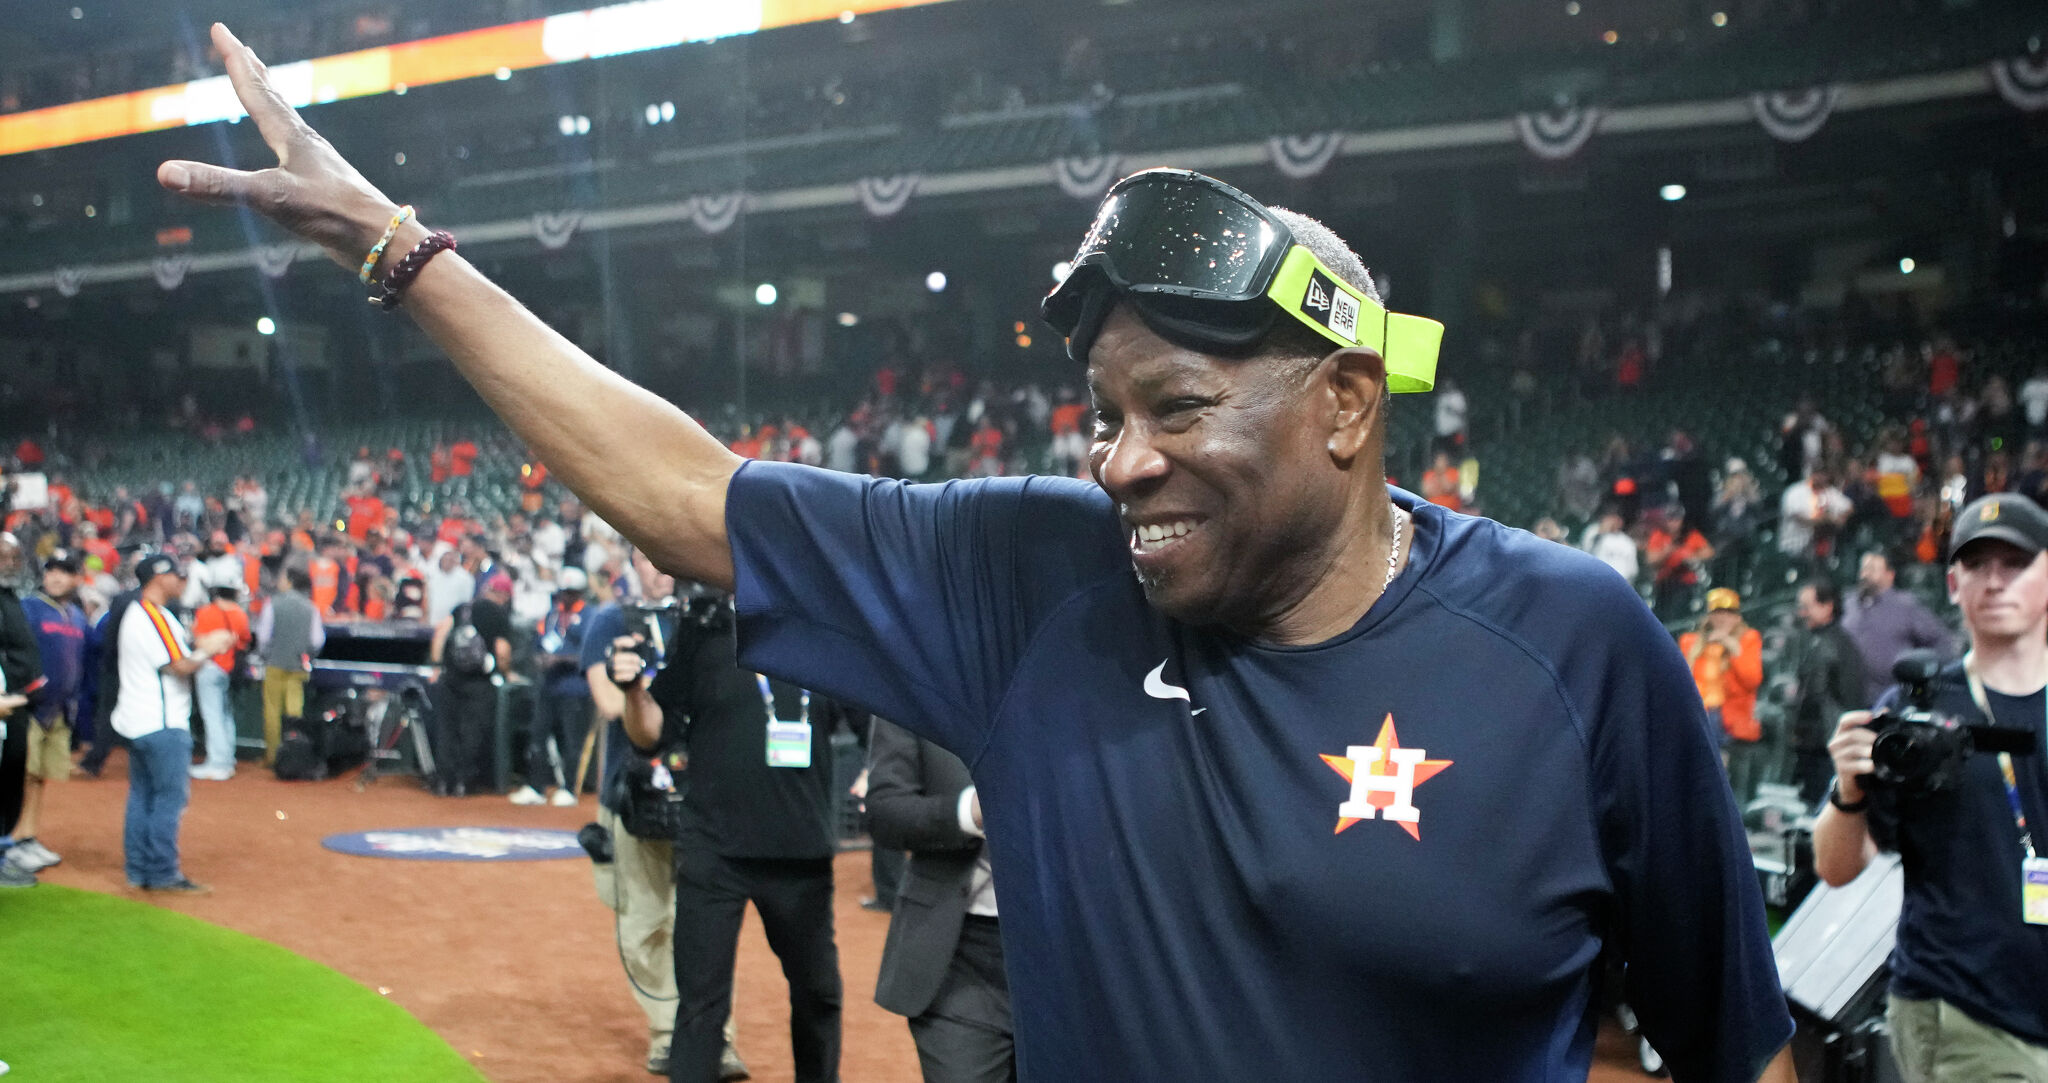 PURE JOY: See the smiles on the field as the Houston Astros